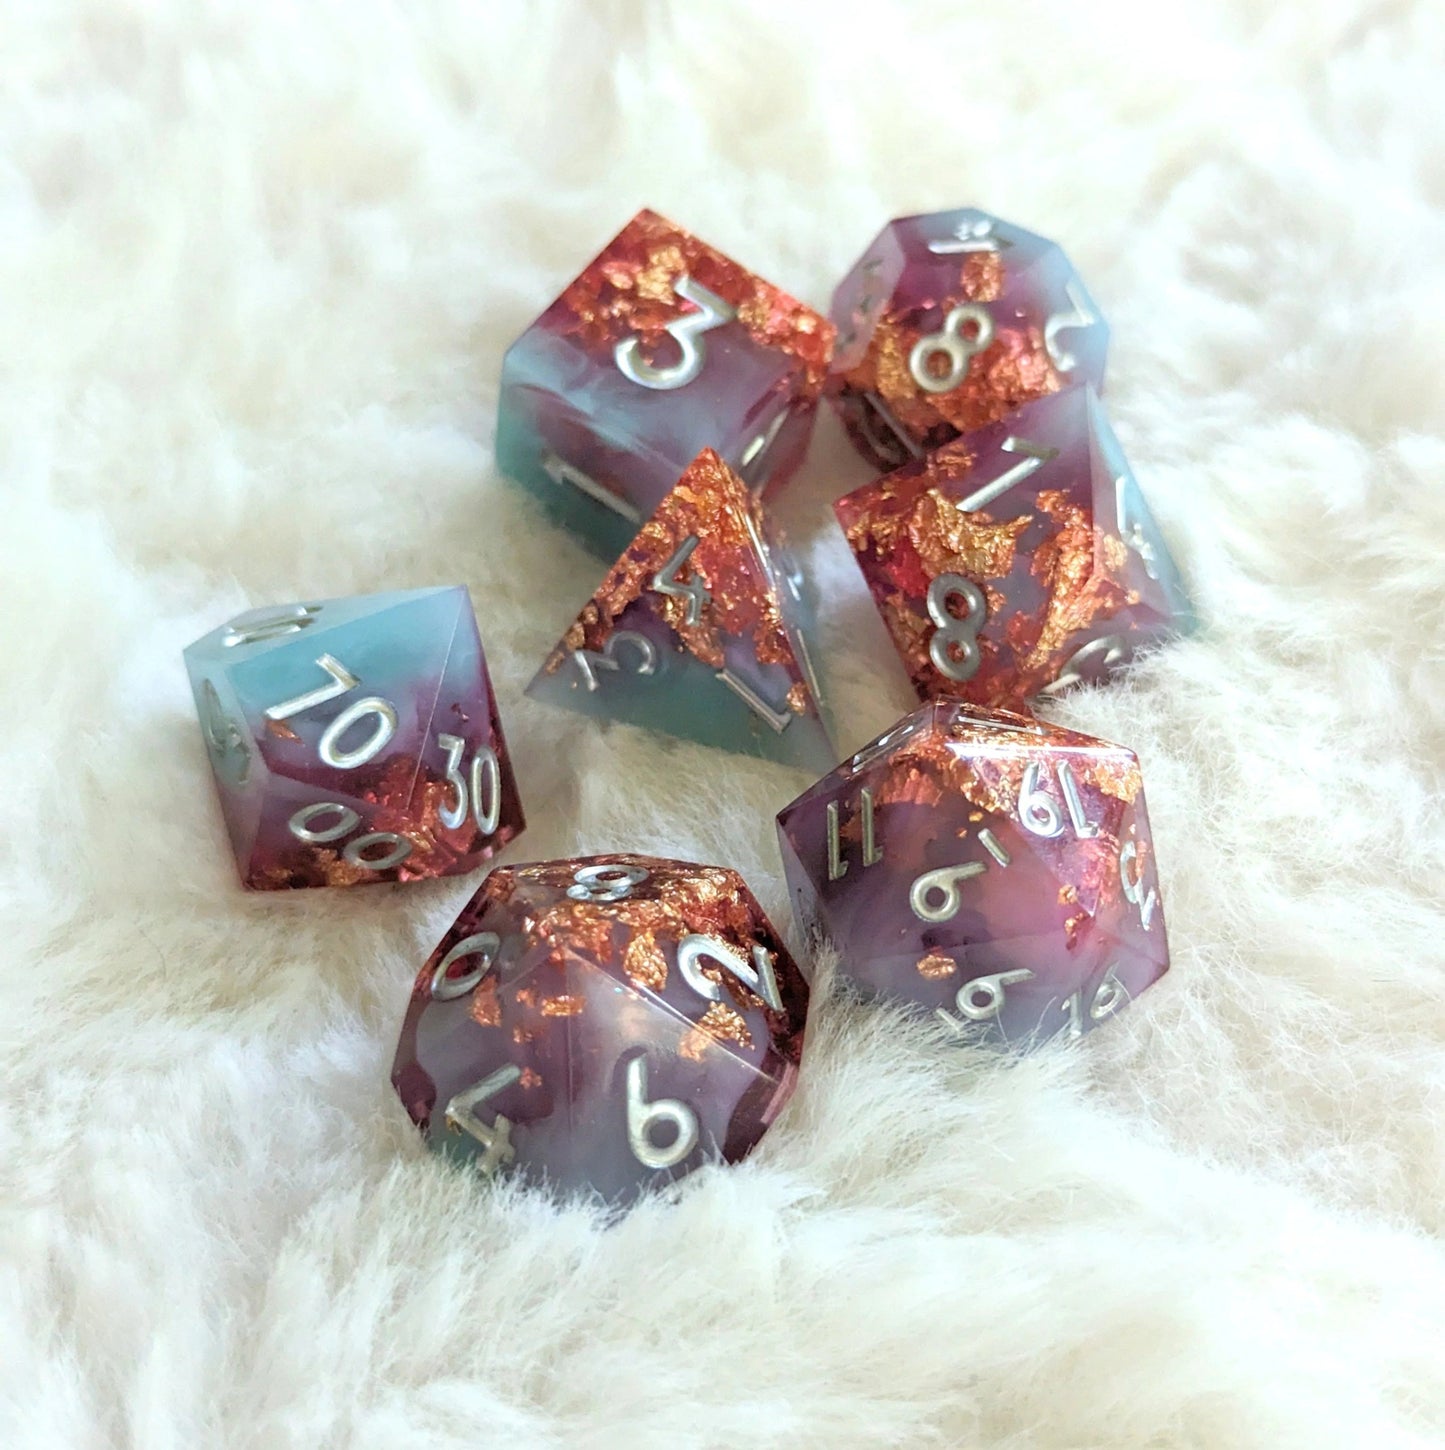 Misty Pools - 7 piece sharp-edge dice set - The Fourth Place